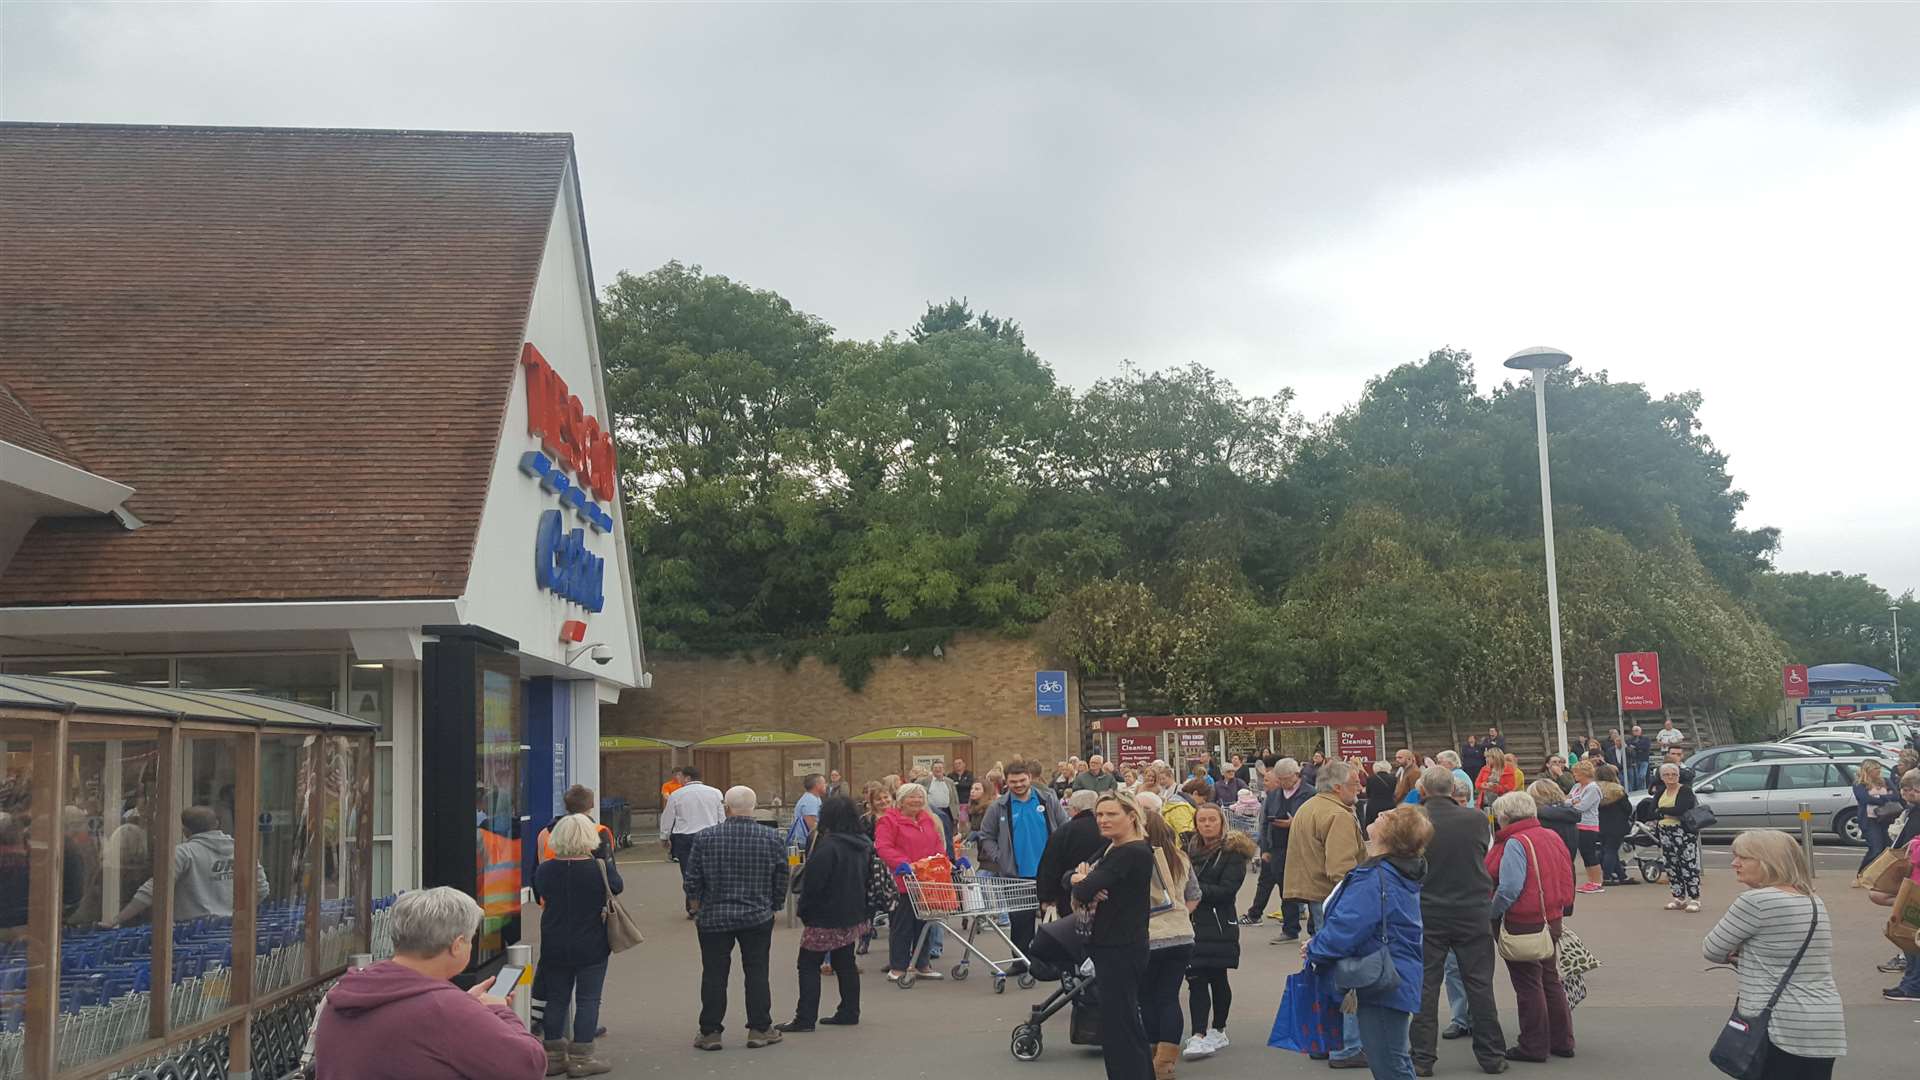 Whitstable Tesco has been evacuated